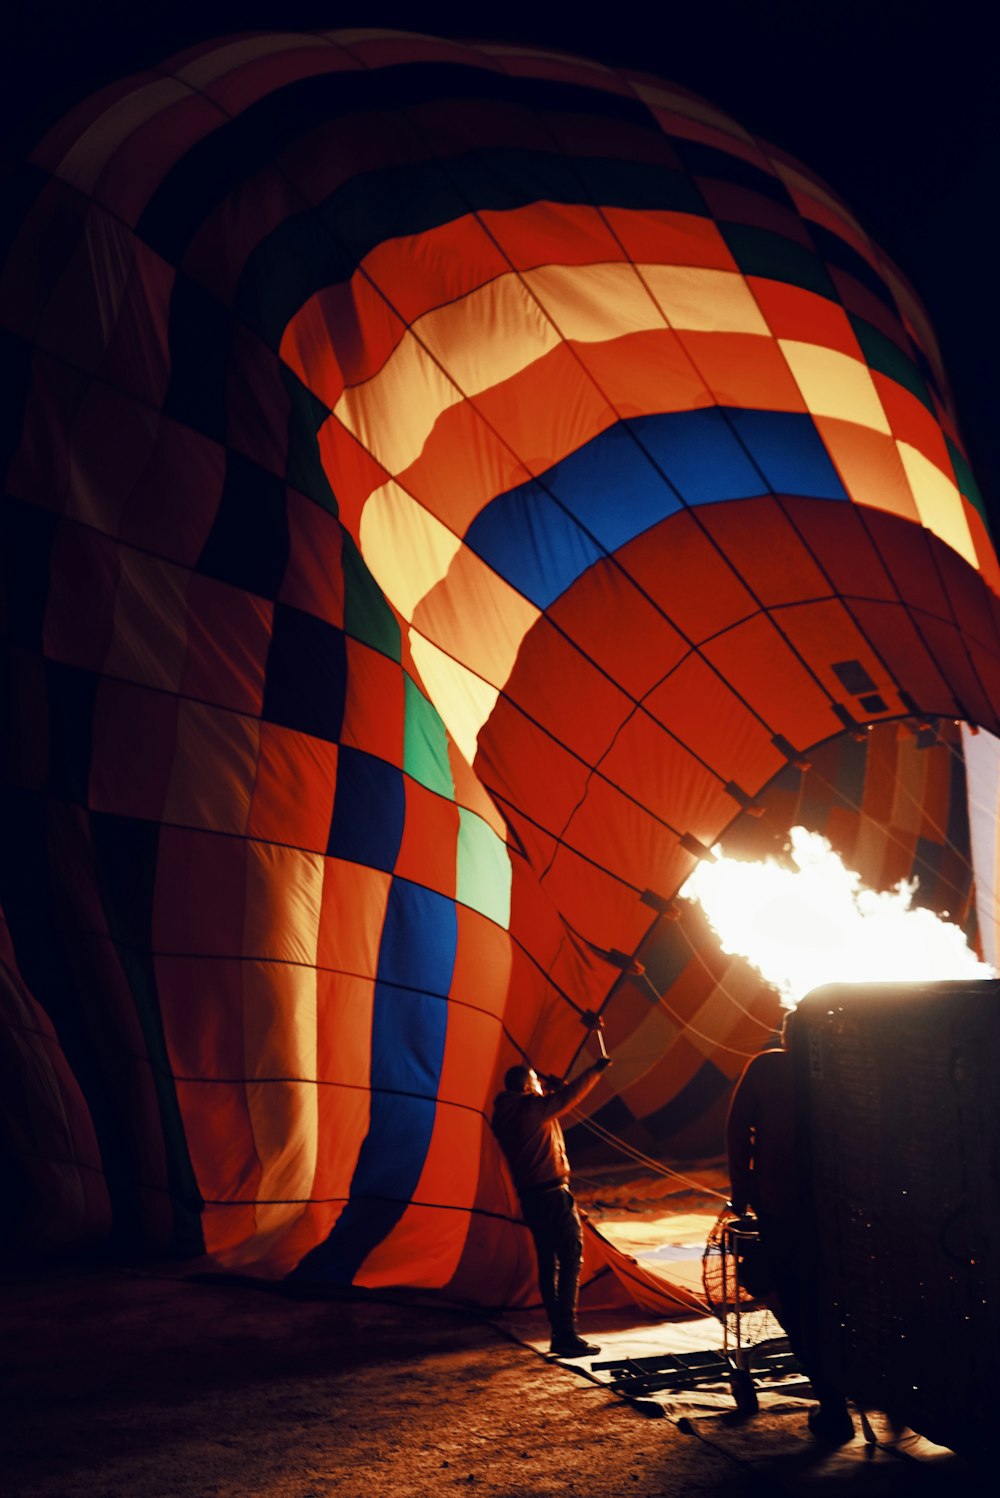 a person standing in front of a large hot air balloon